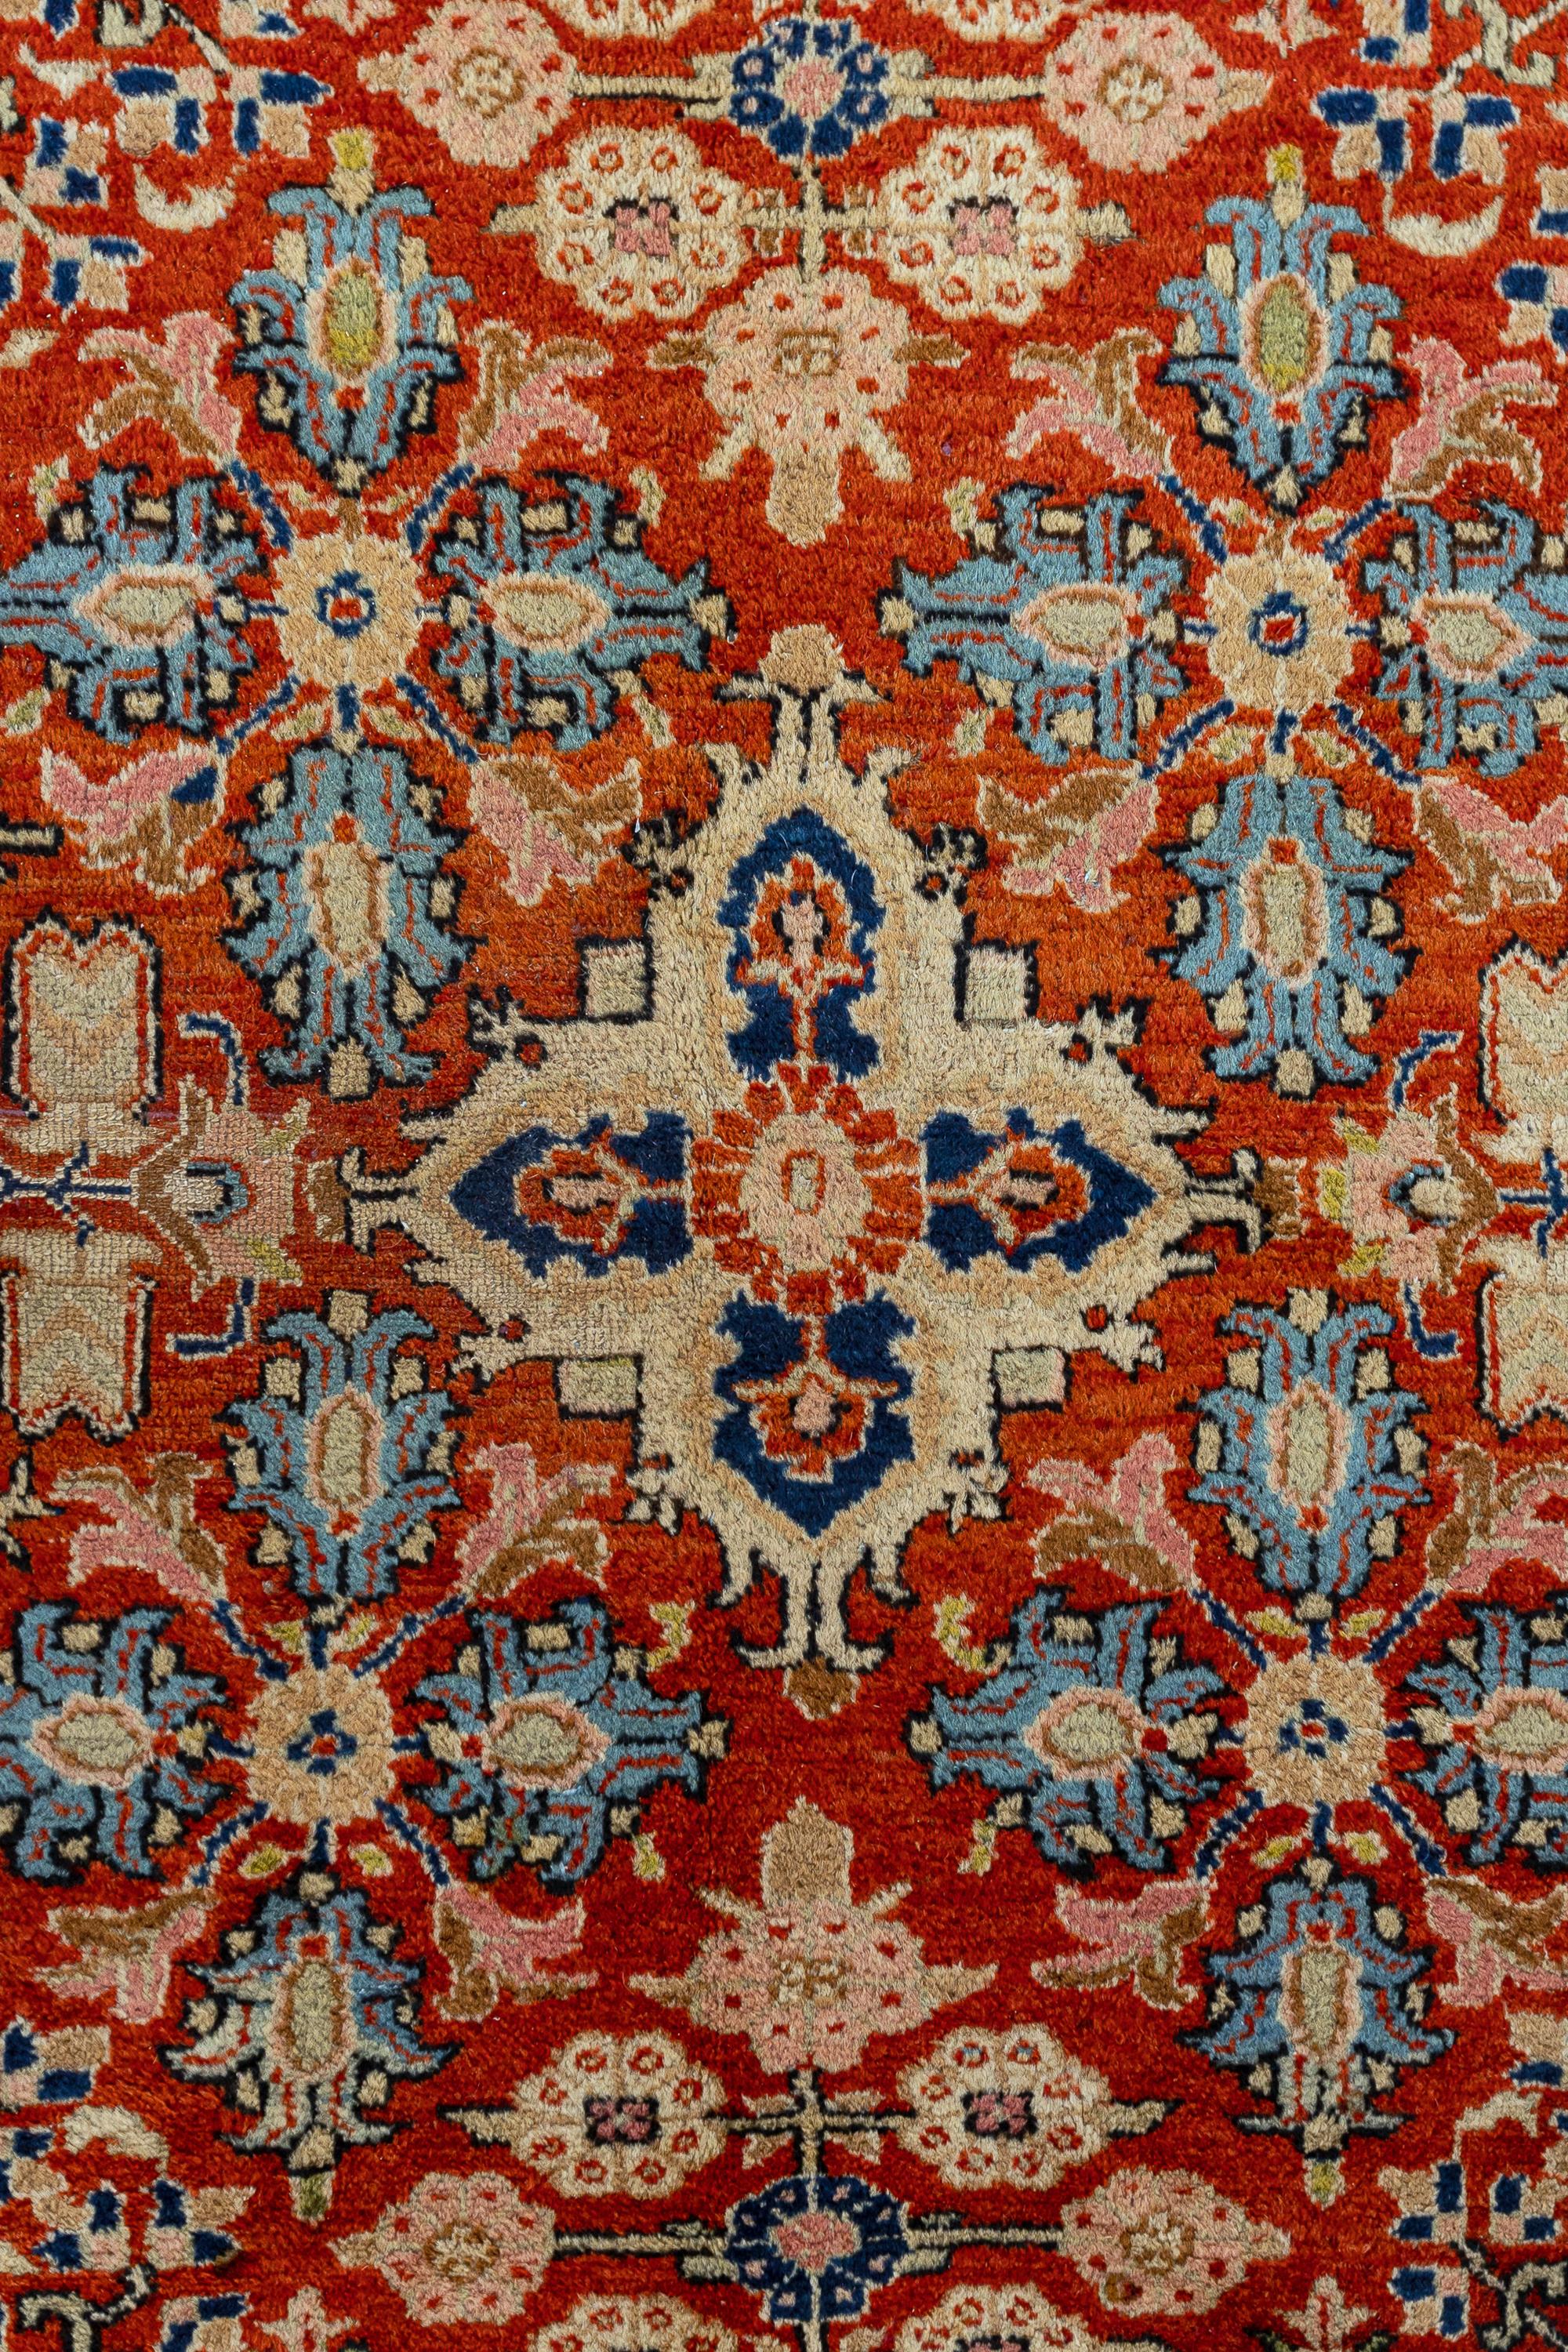 Lilihan – West Persia

Offering a rare and captivating colour combination of red, blue, and gold, this exclusive antique rug presents fantastic home decorating possibilities. The large-scale motifs scattered throughout the carpet, individually drawn